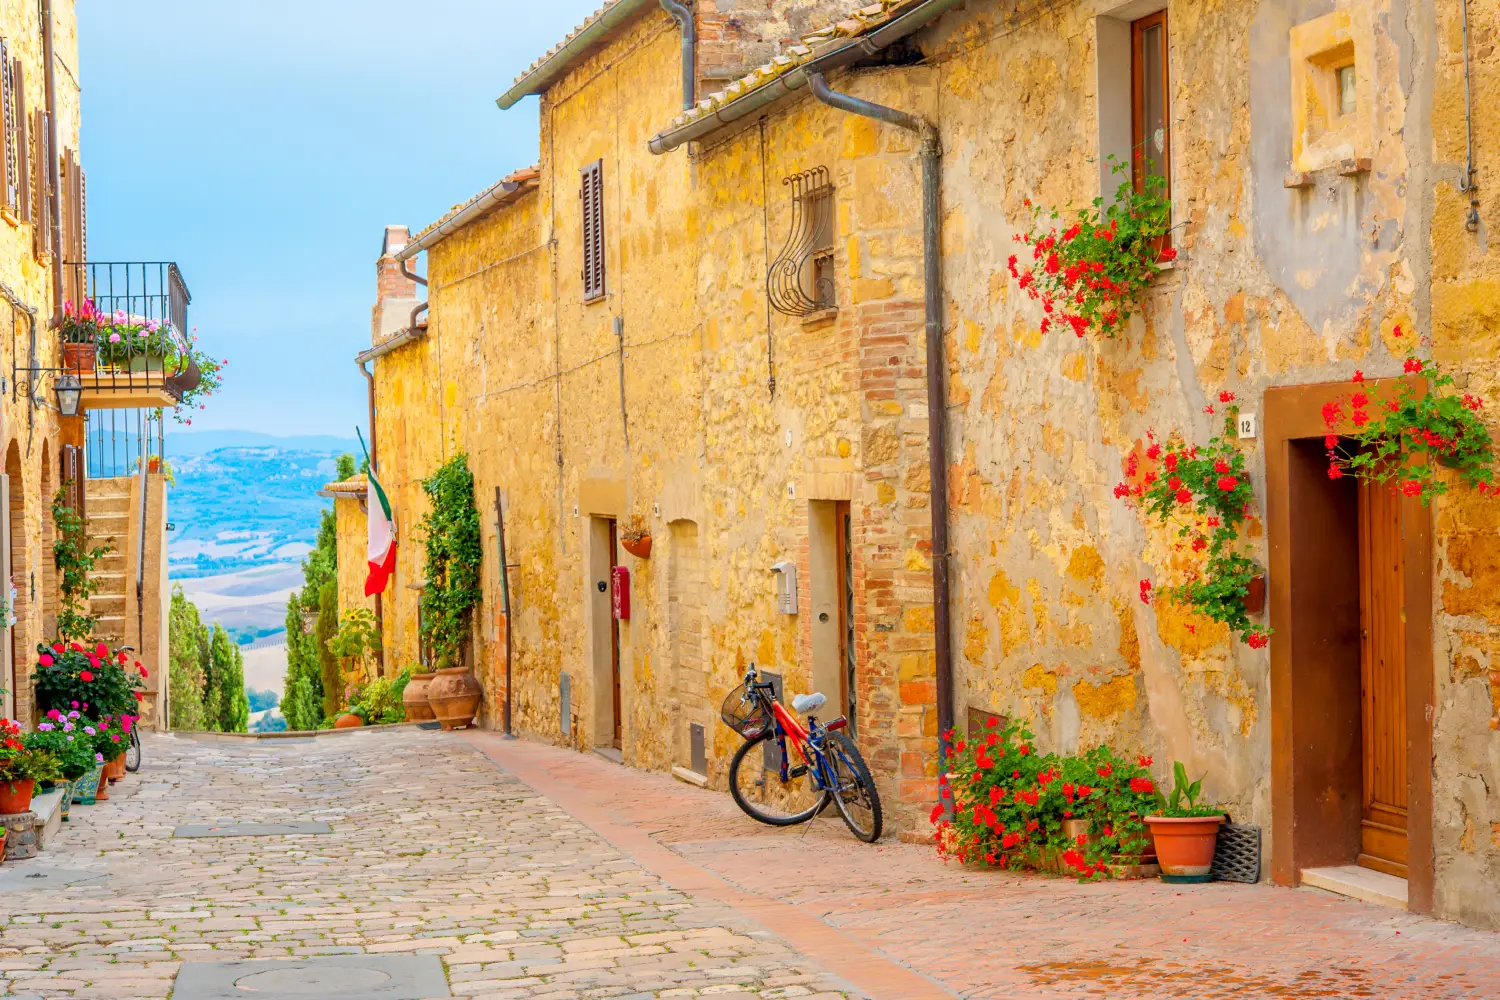 Ferry to Livorno - A street in the beautiful little village of San Gimignano with a view of the Tuscan valley, Italy, Europe.